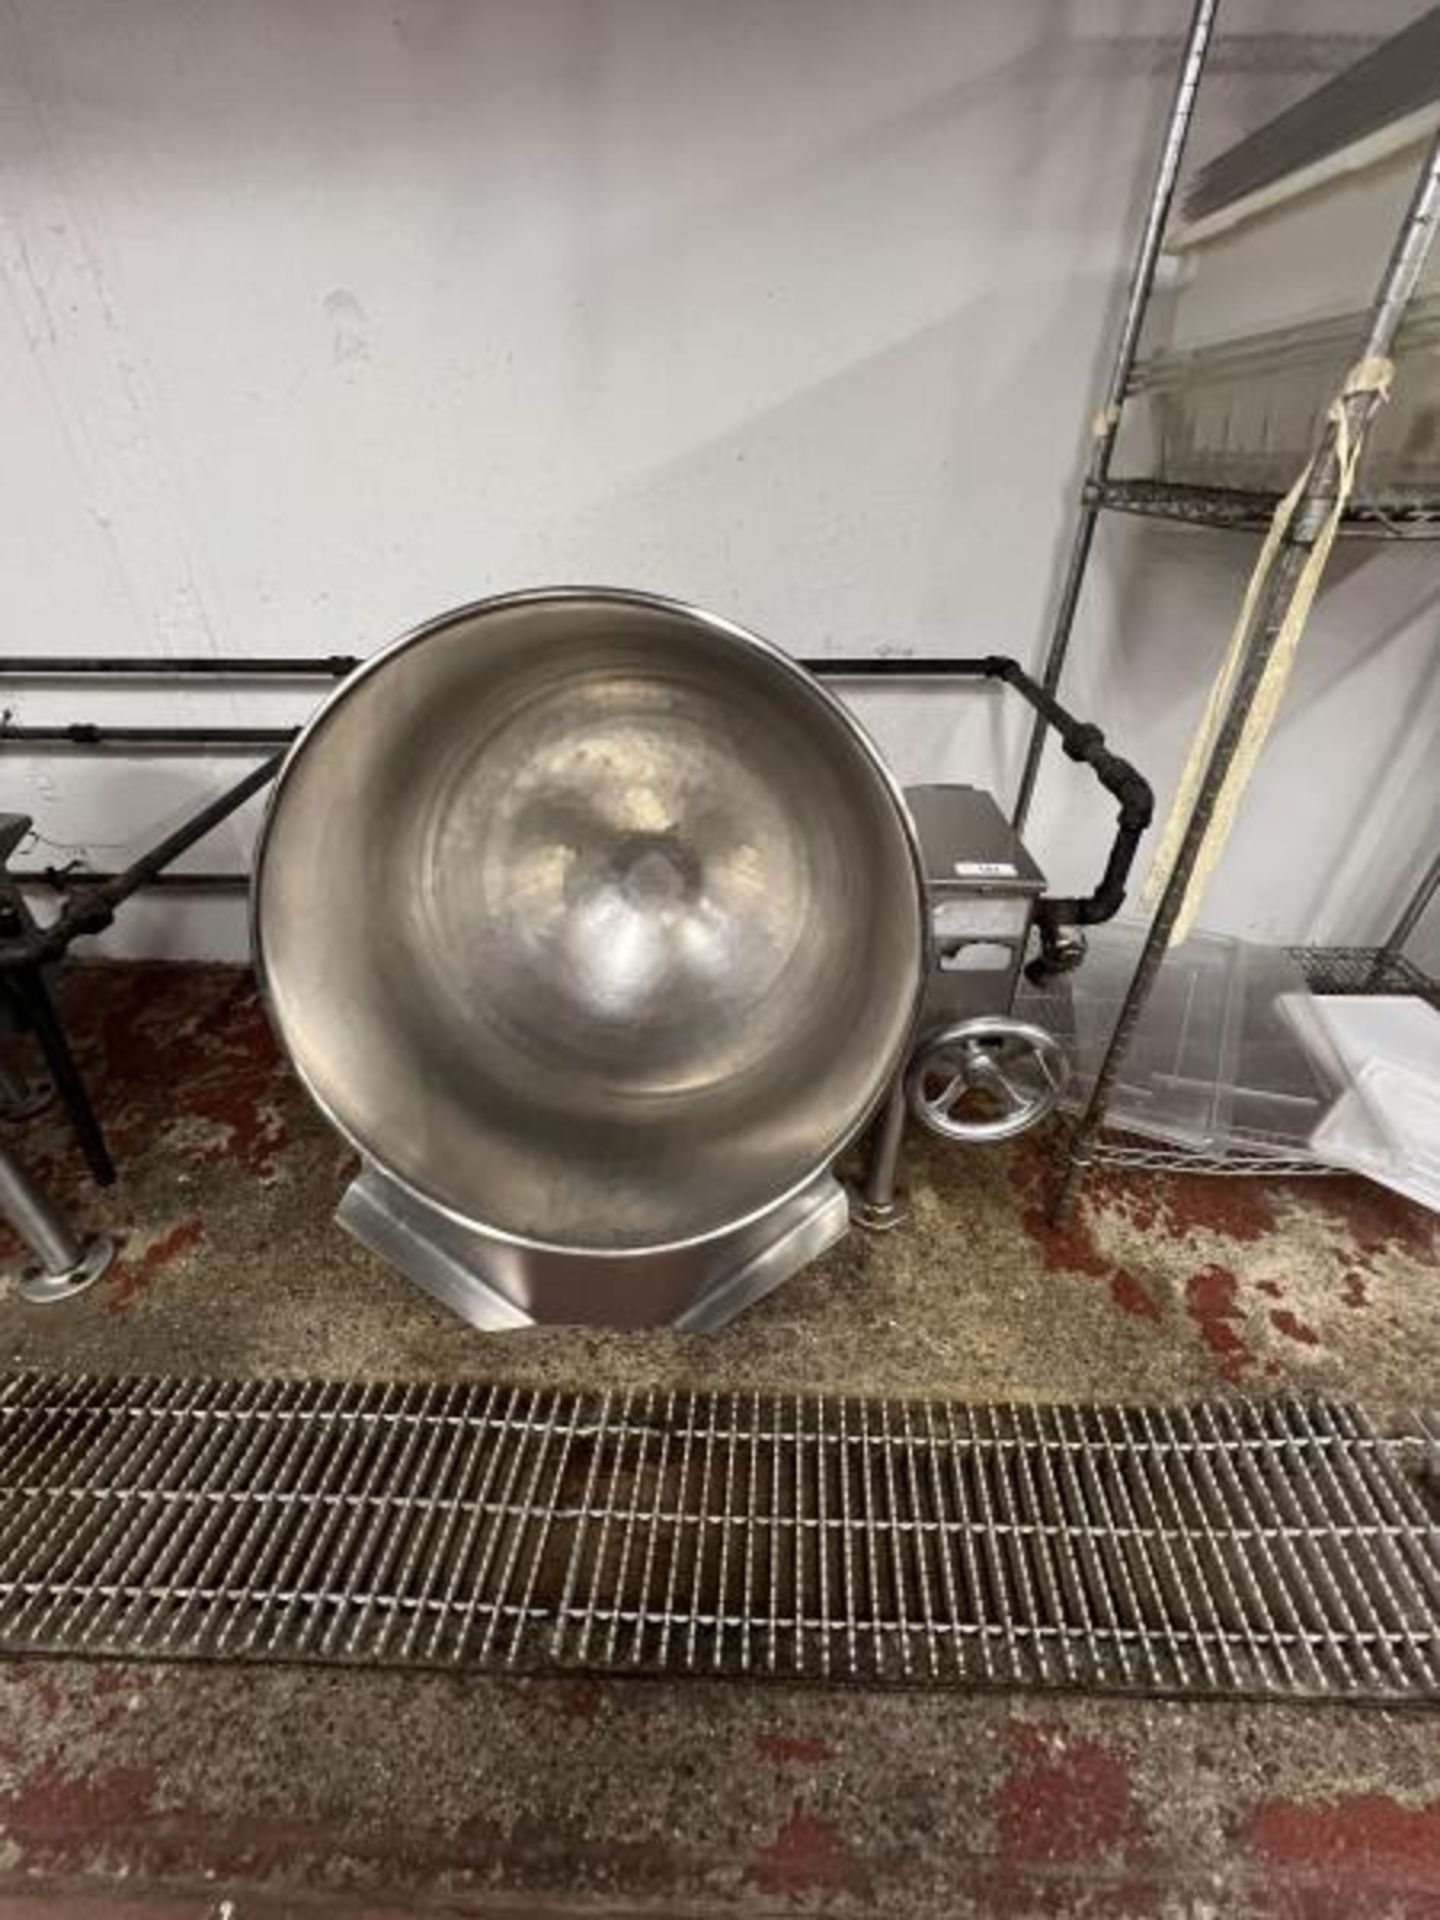 Stainless Steel Steam Kettle 27" Diameter Located in Basement Kitchen - Image 4 of 4